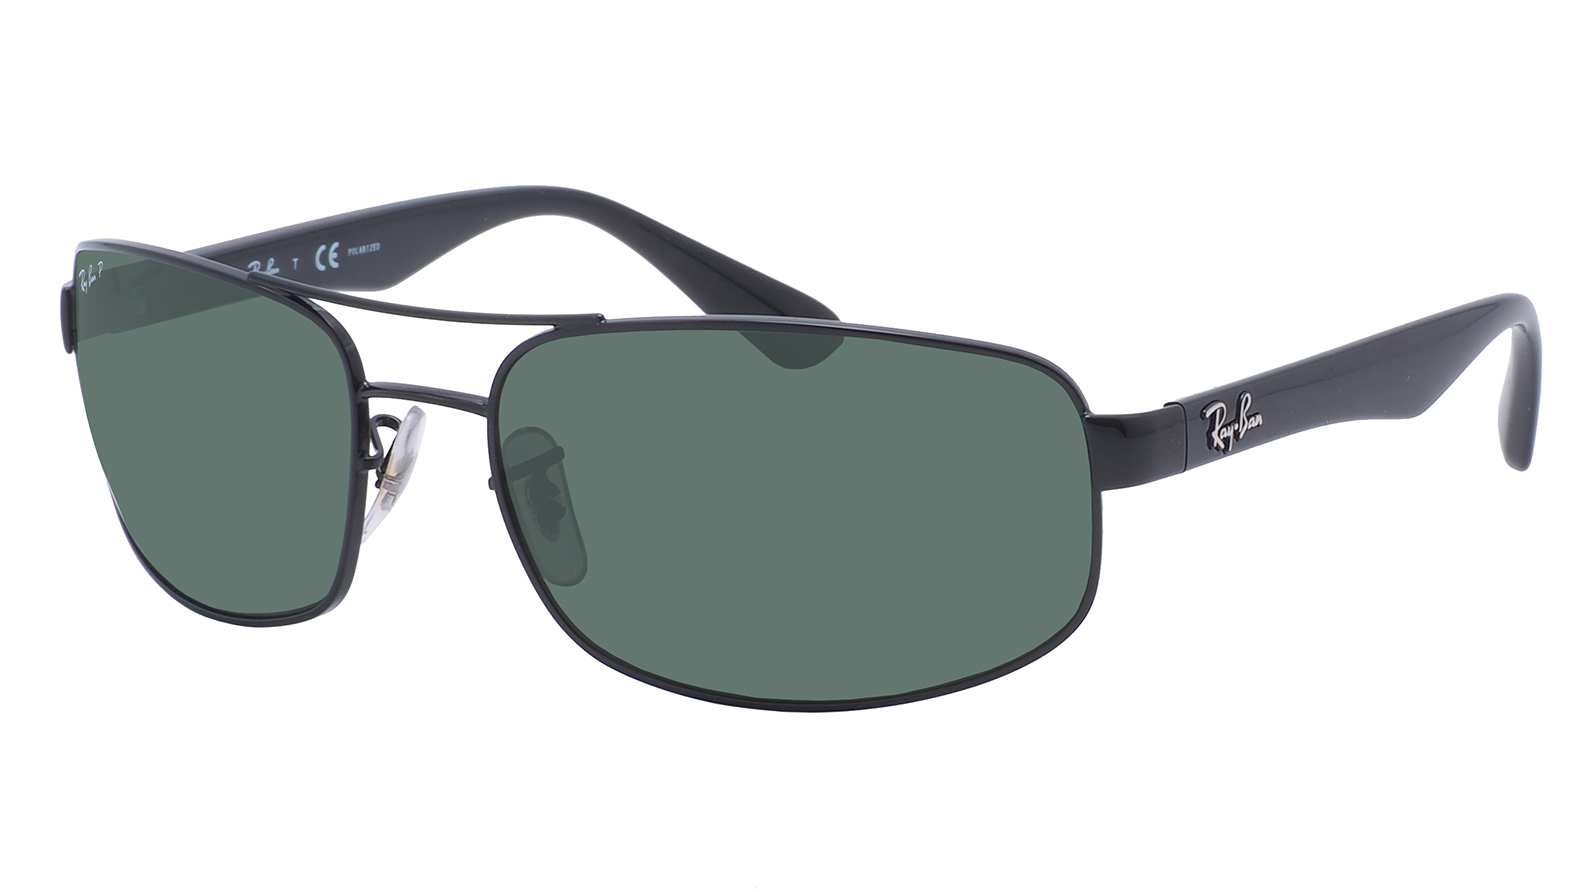 Ray-Ban Active Lifestyle RB 3445 002/58 ray ban active lifestyle rb 3683 001 31